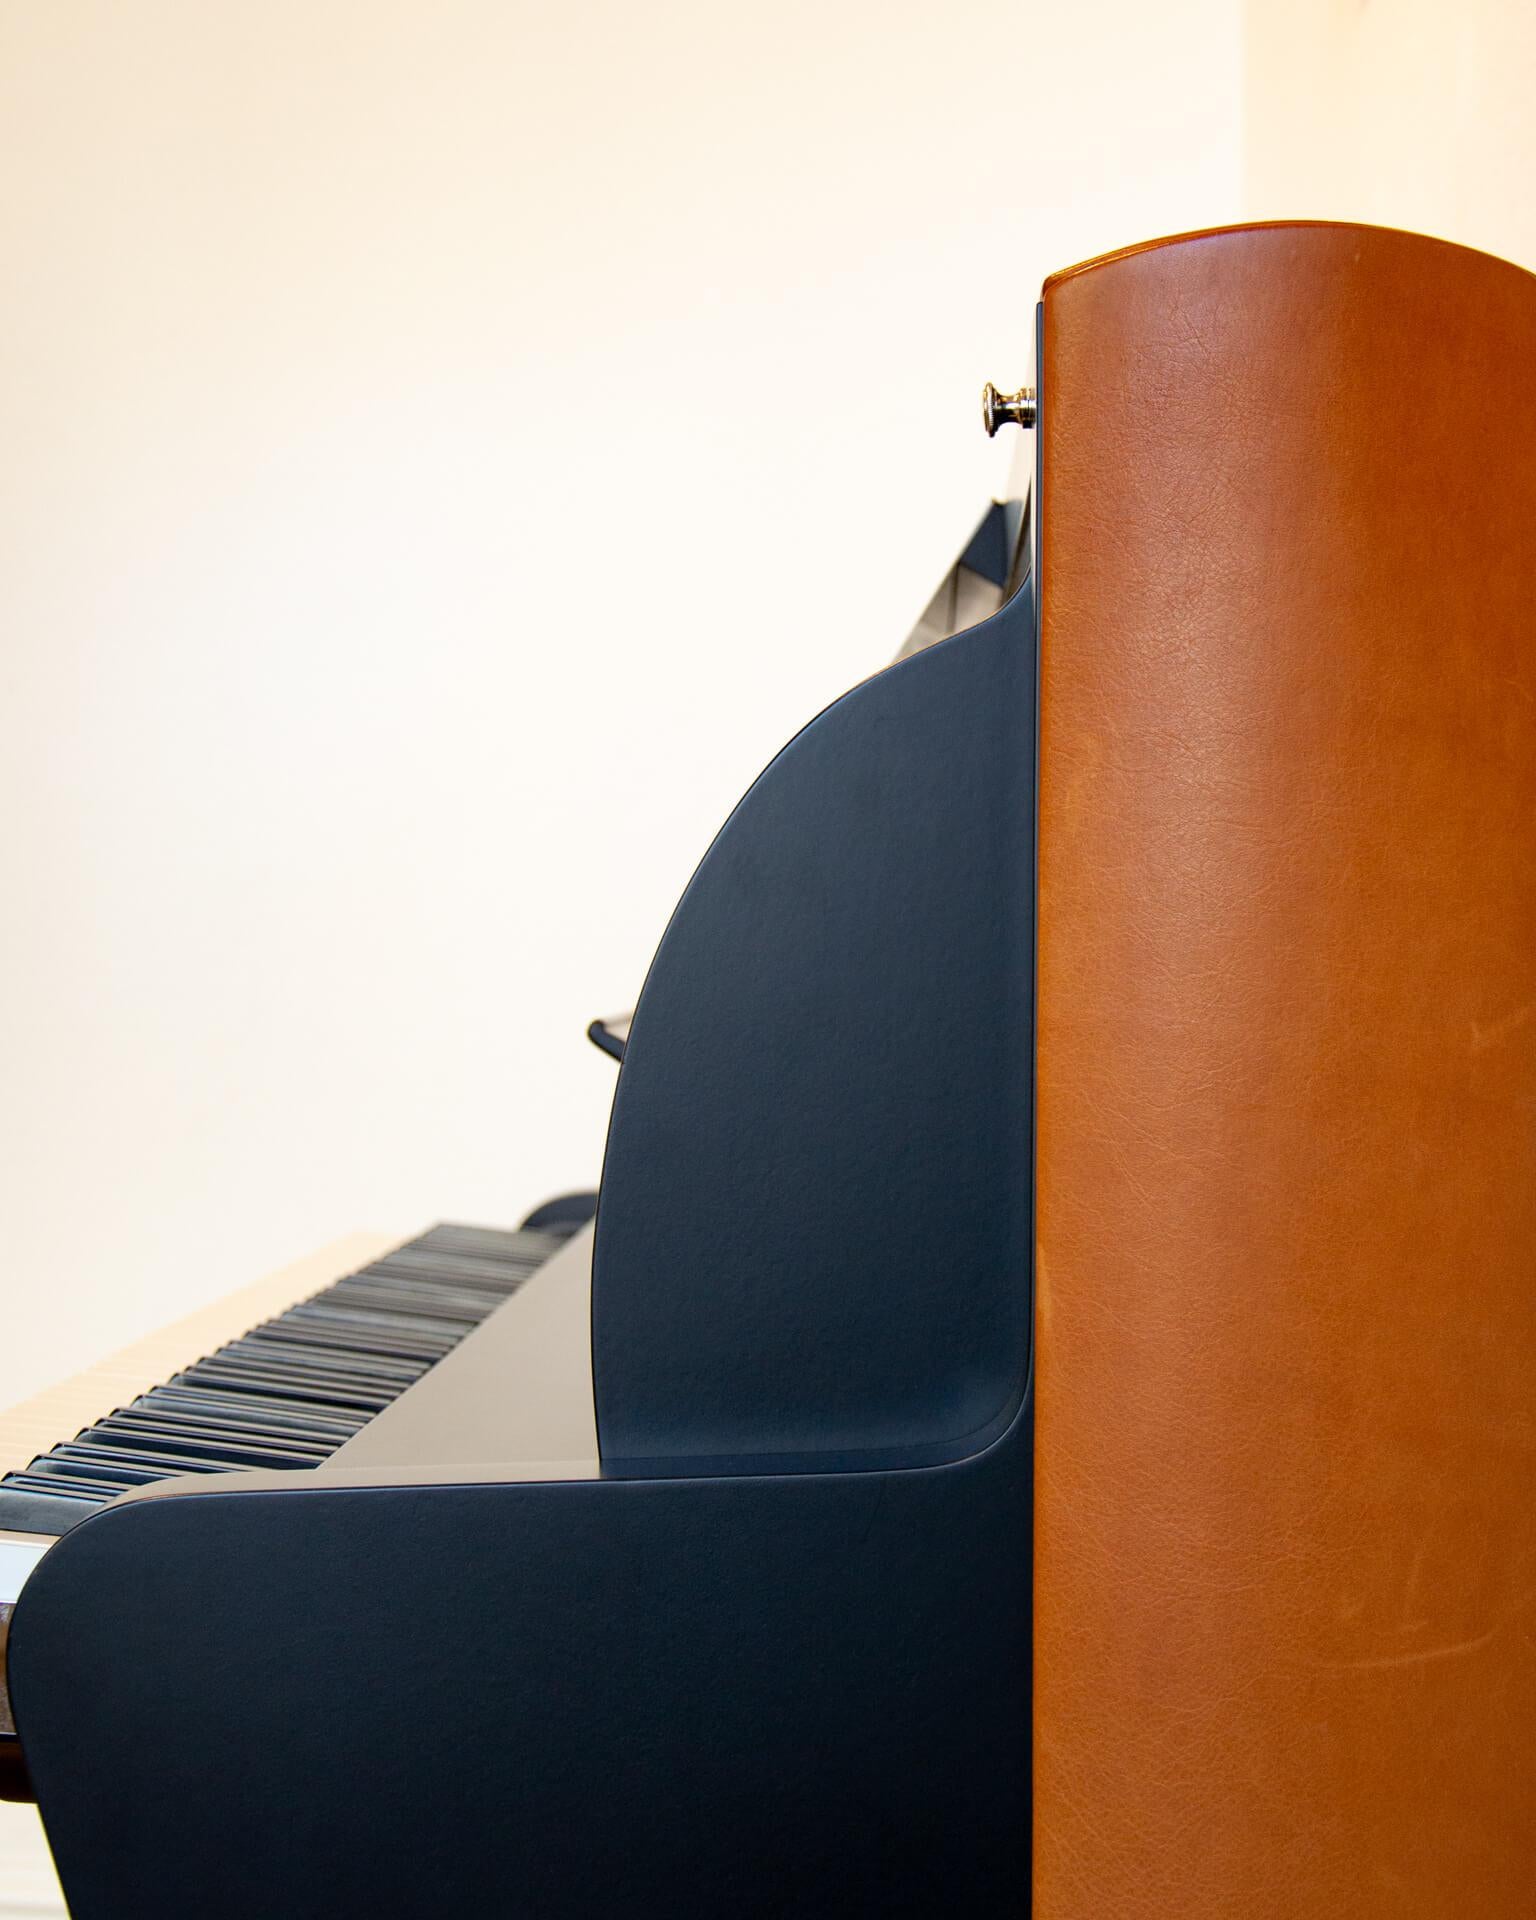 PH Upright Piano, Cognac Color Leather with Chrome, Modern, Sculptural In Excellent Condition For Sale In Copenhagen, DK